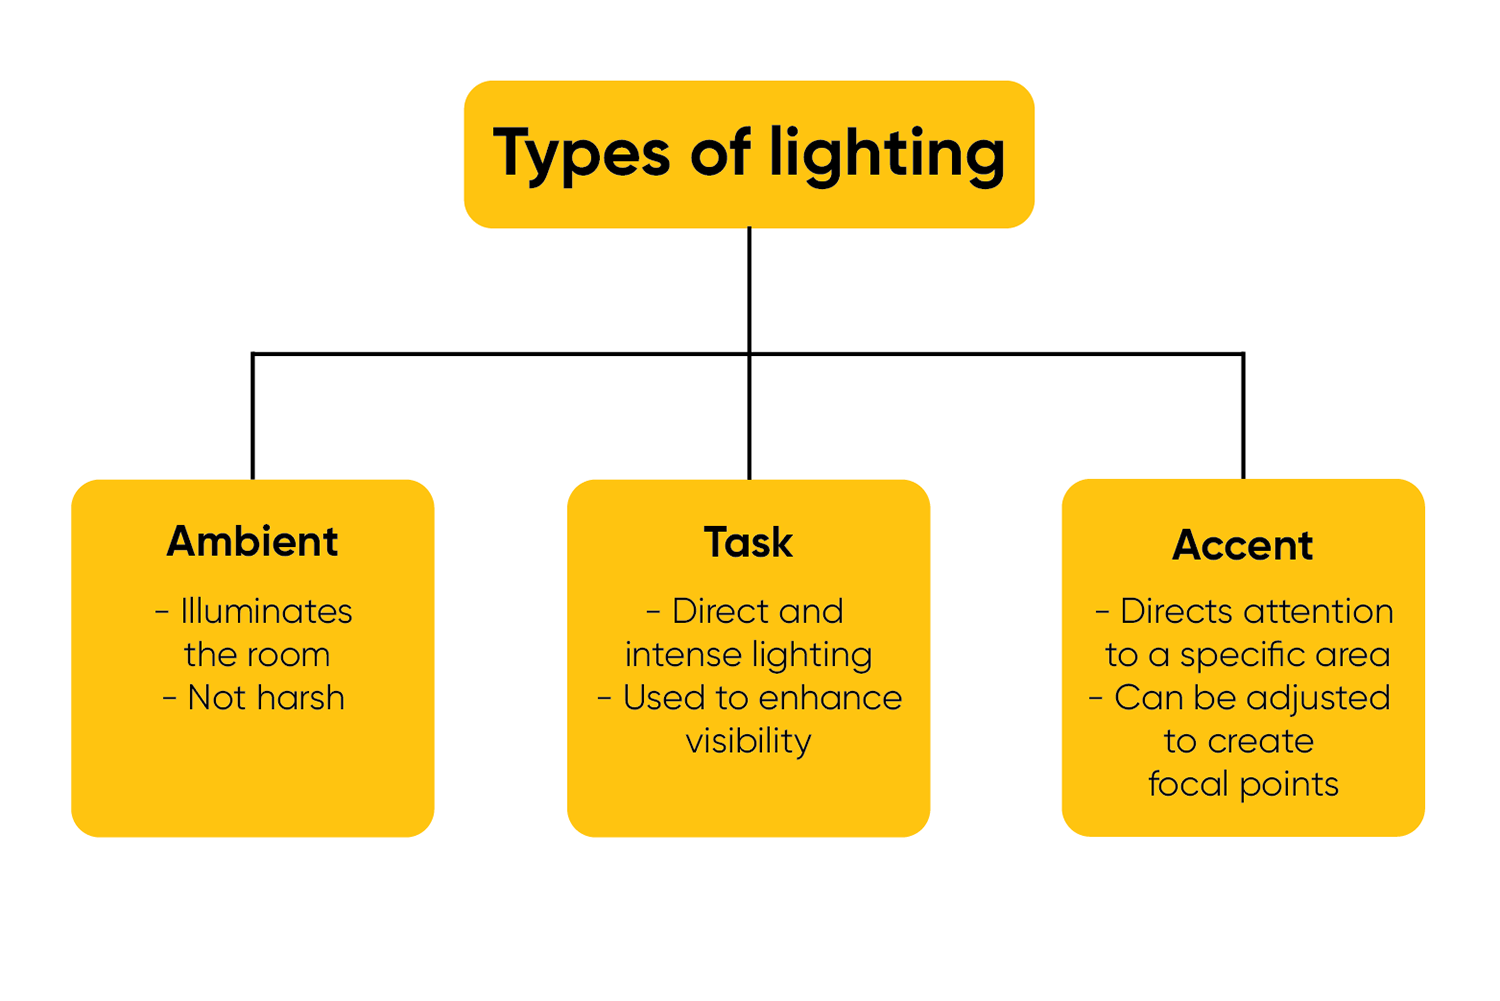 types of lighting-chart-main categories-ambient-task-accent